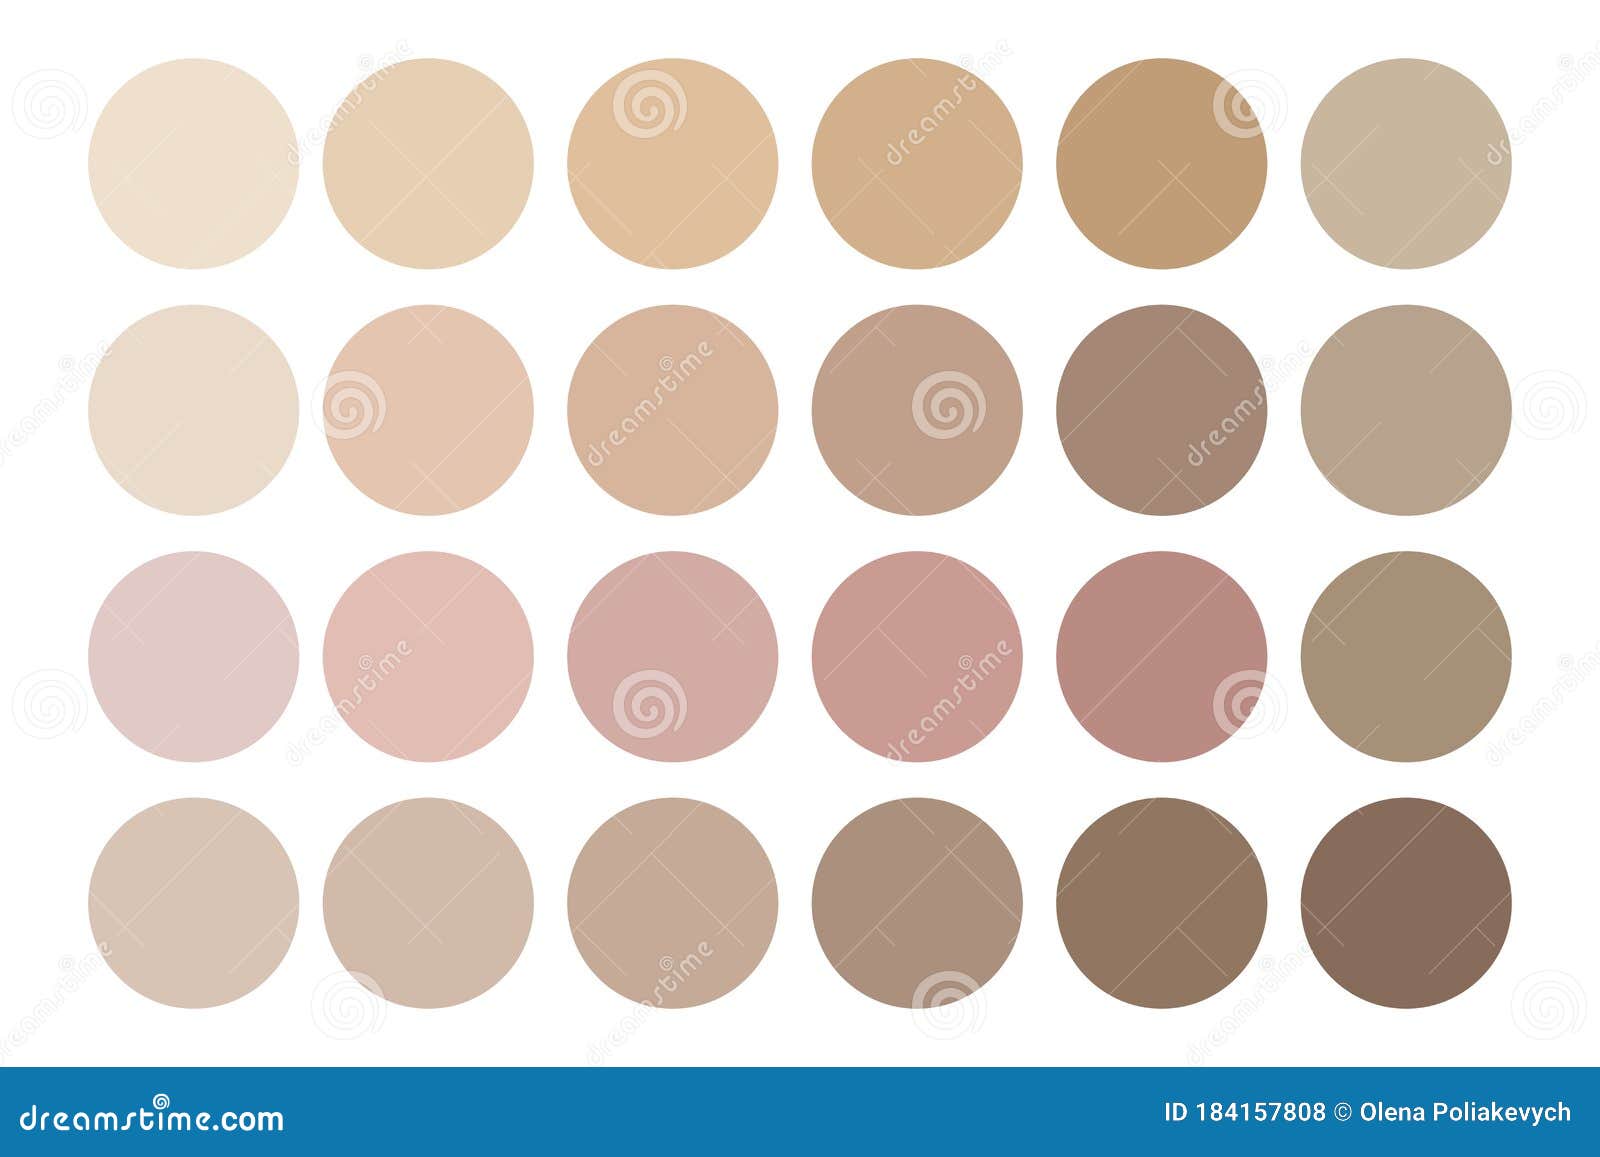 Vector Image of Human Skin Tones. Color Palette of Body Creams. Stock ...